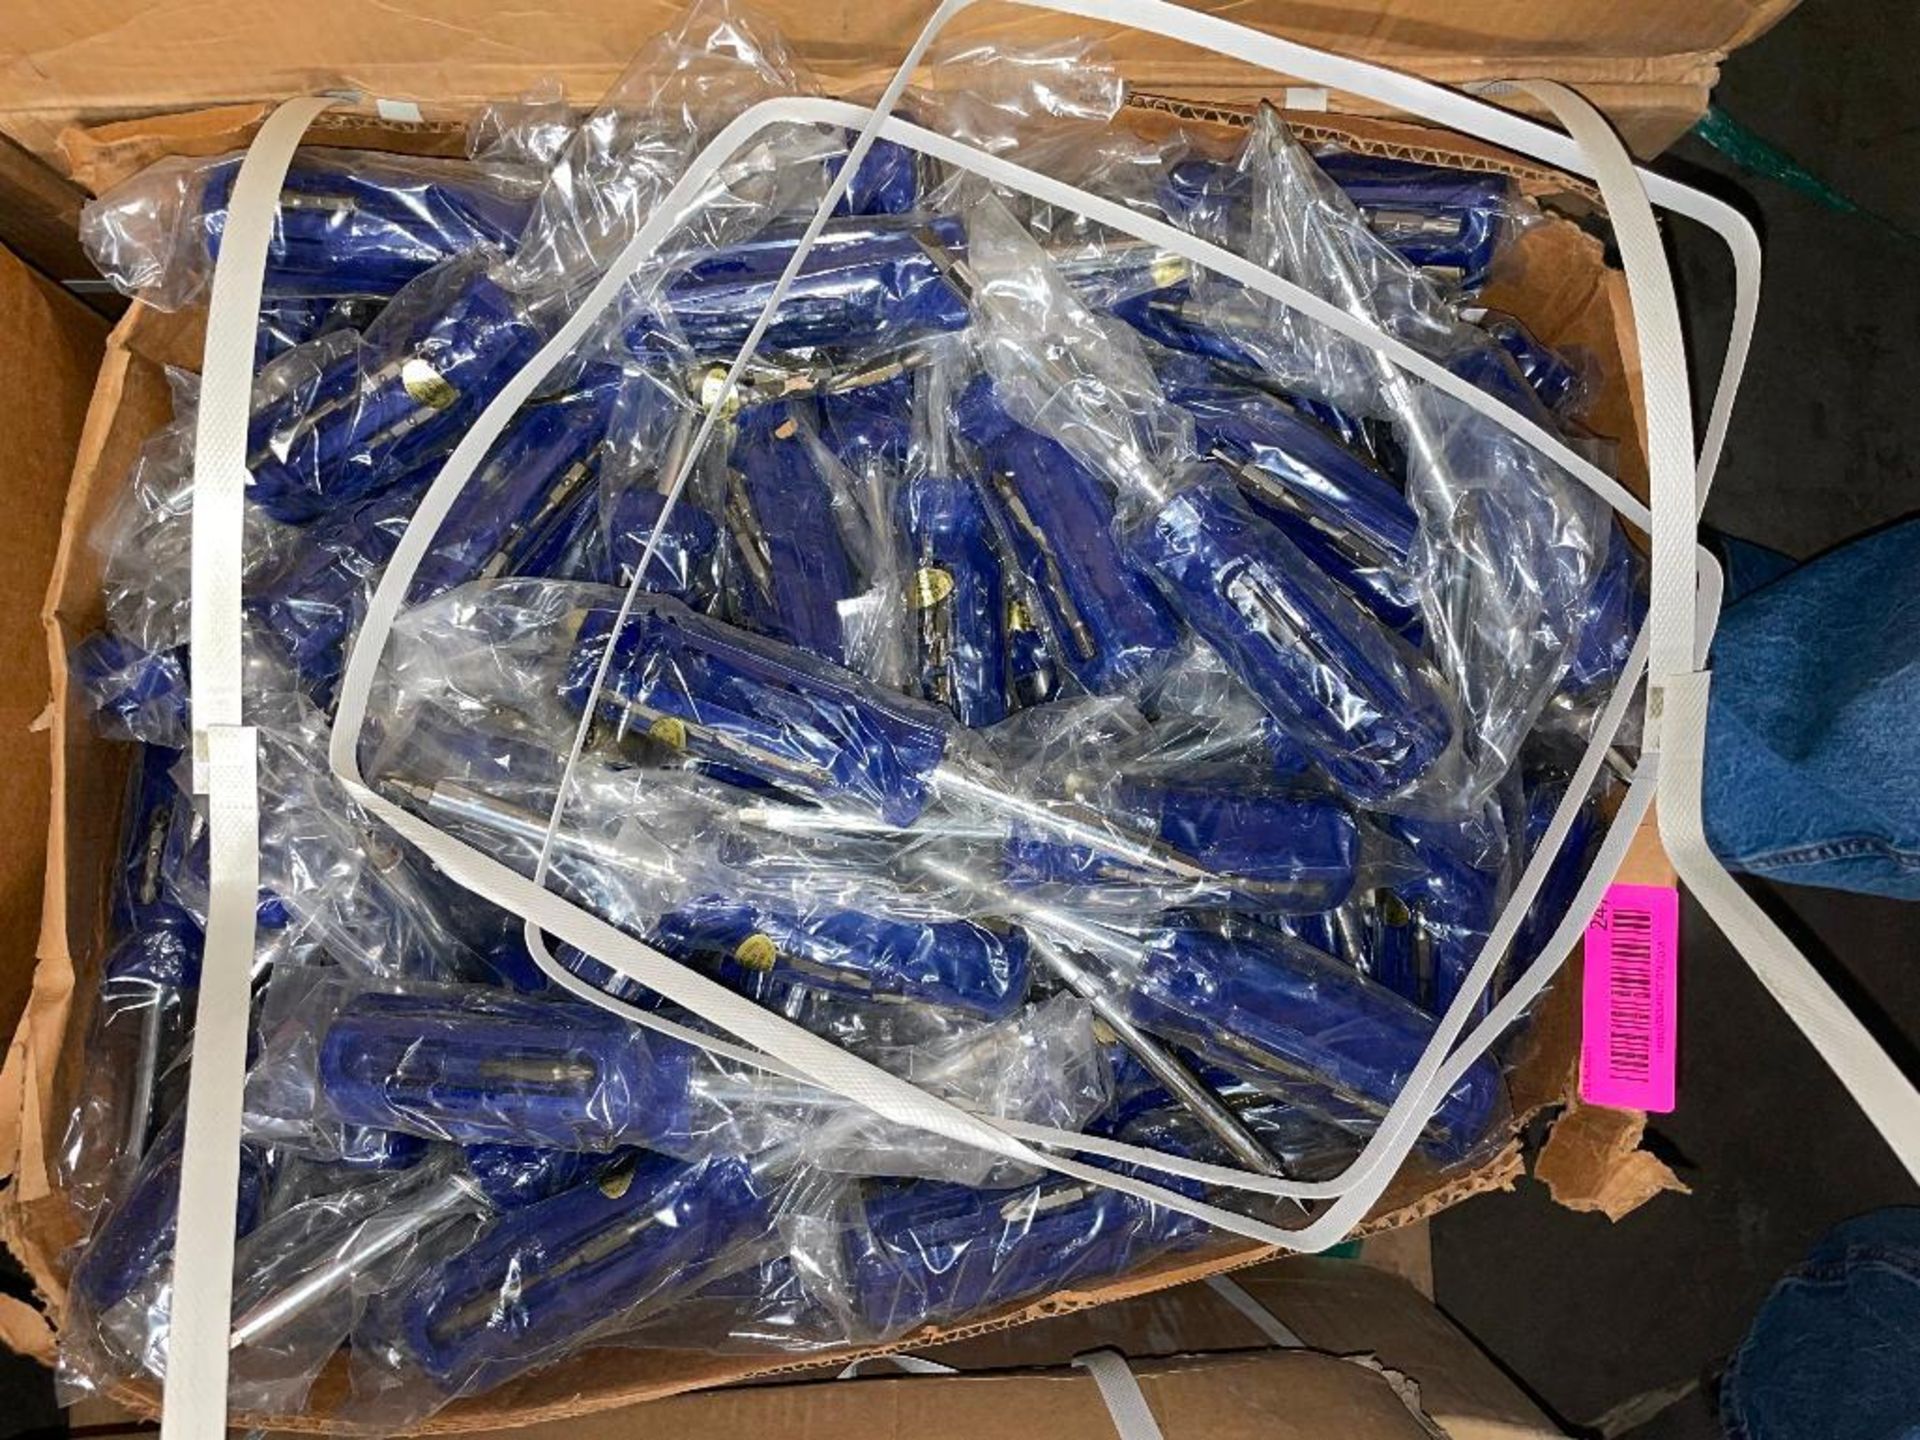 (1) BOX OF EAZY POWER 25 IN 1 SCREW DRIVERS. APPROX 100 IN BOX. ADDITIONAL INFORMATION RETAILS FOR $ - Image 3 of 3